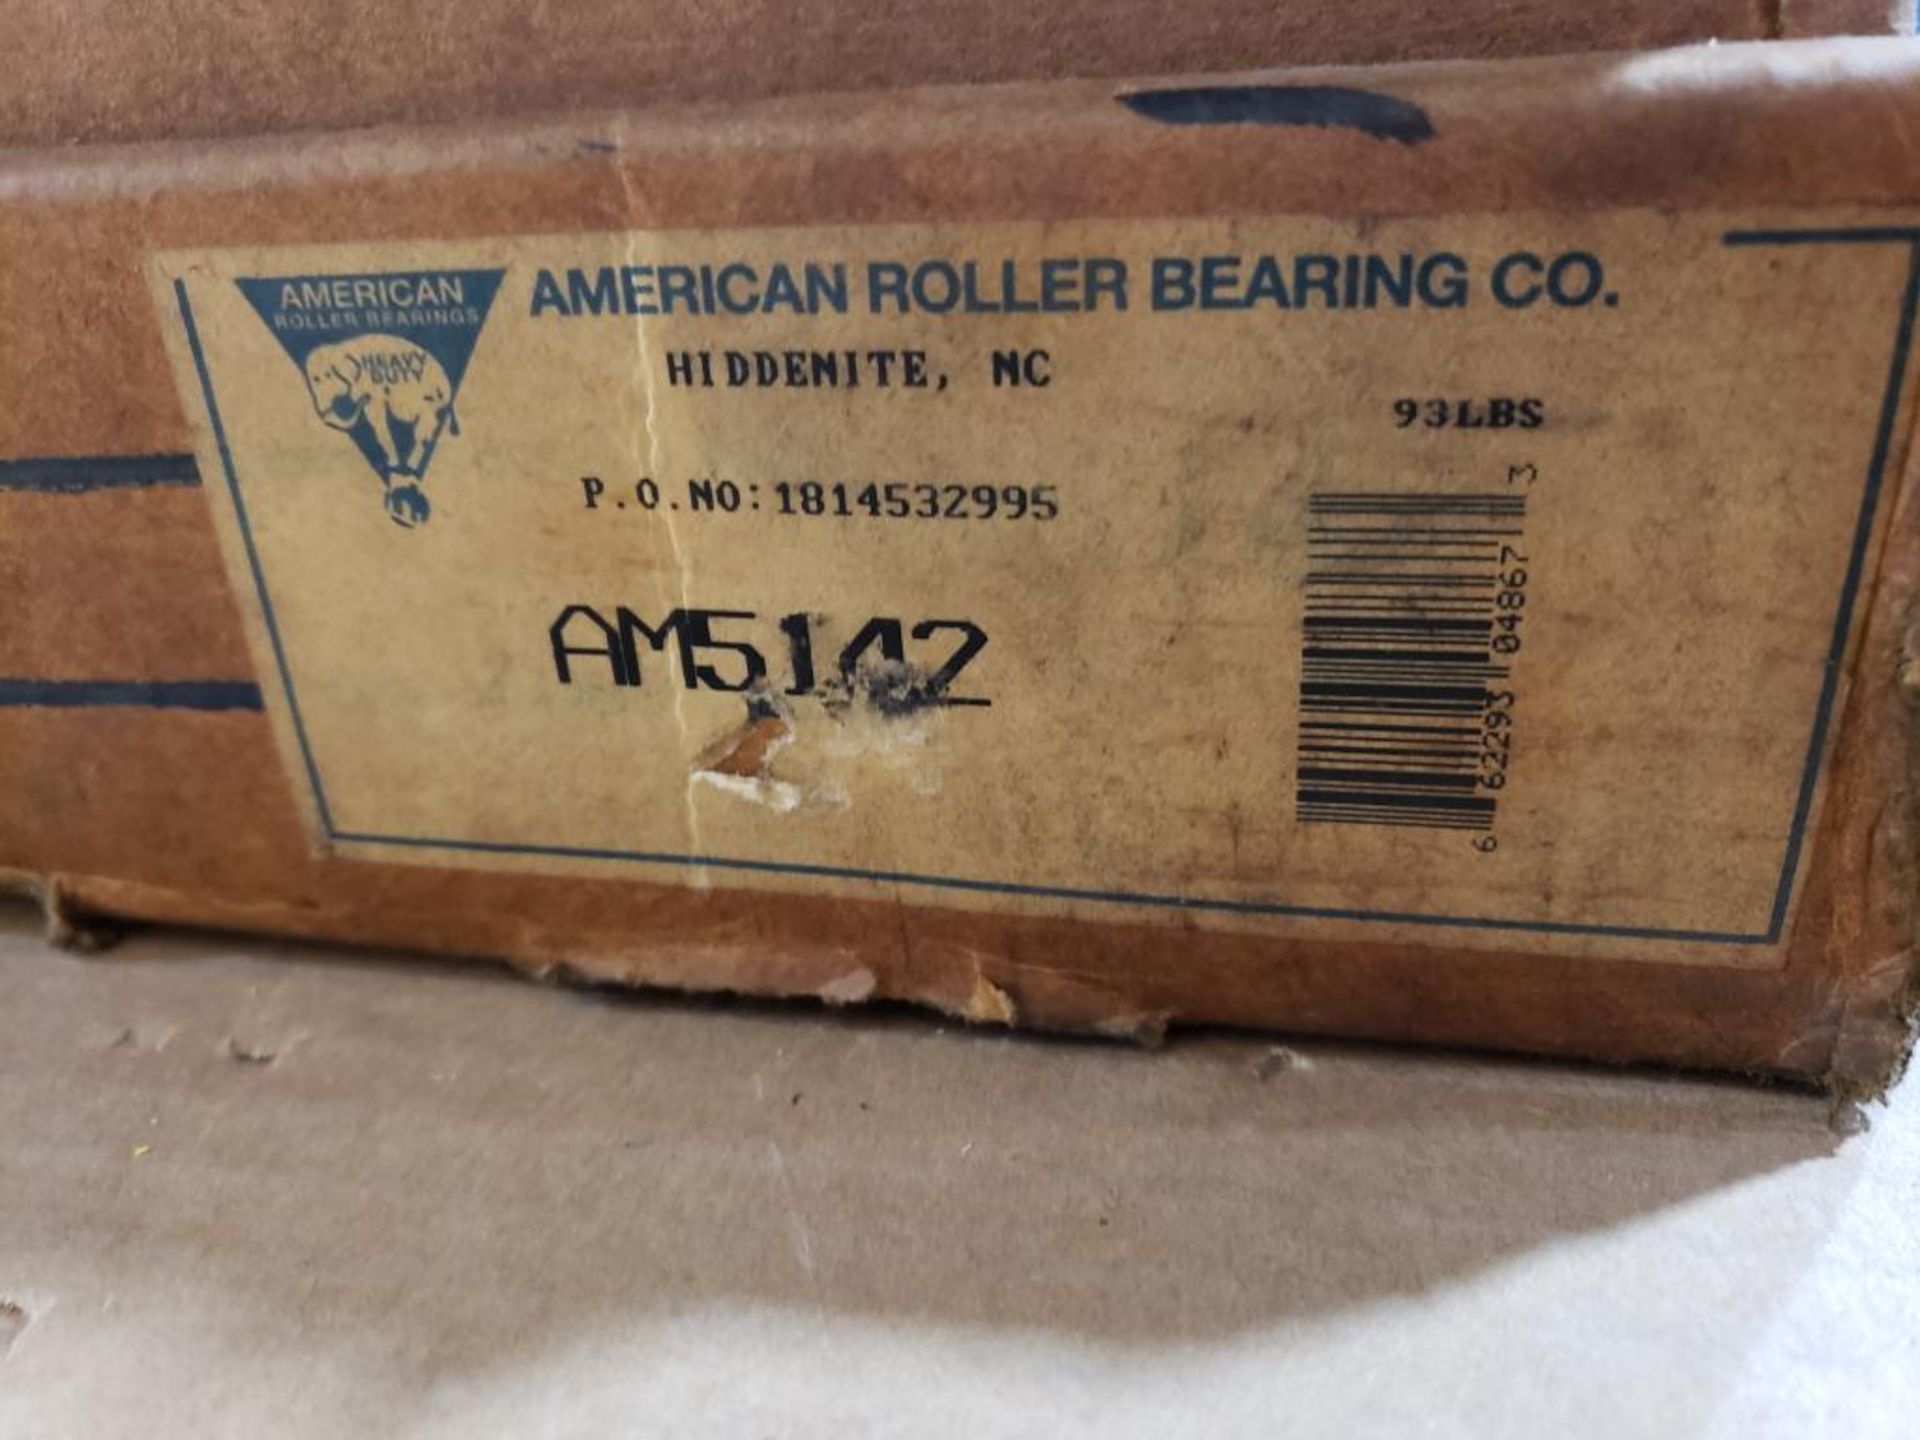 American Roller Bearing Company. Part number AM5142. - Image 4 of 6